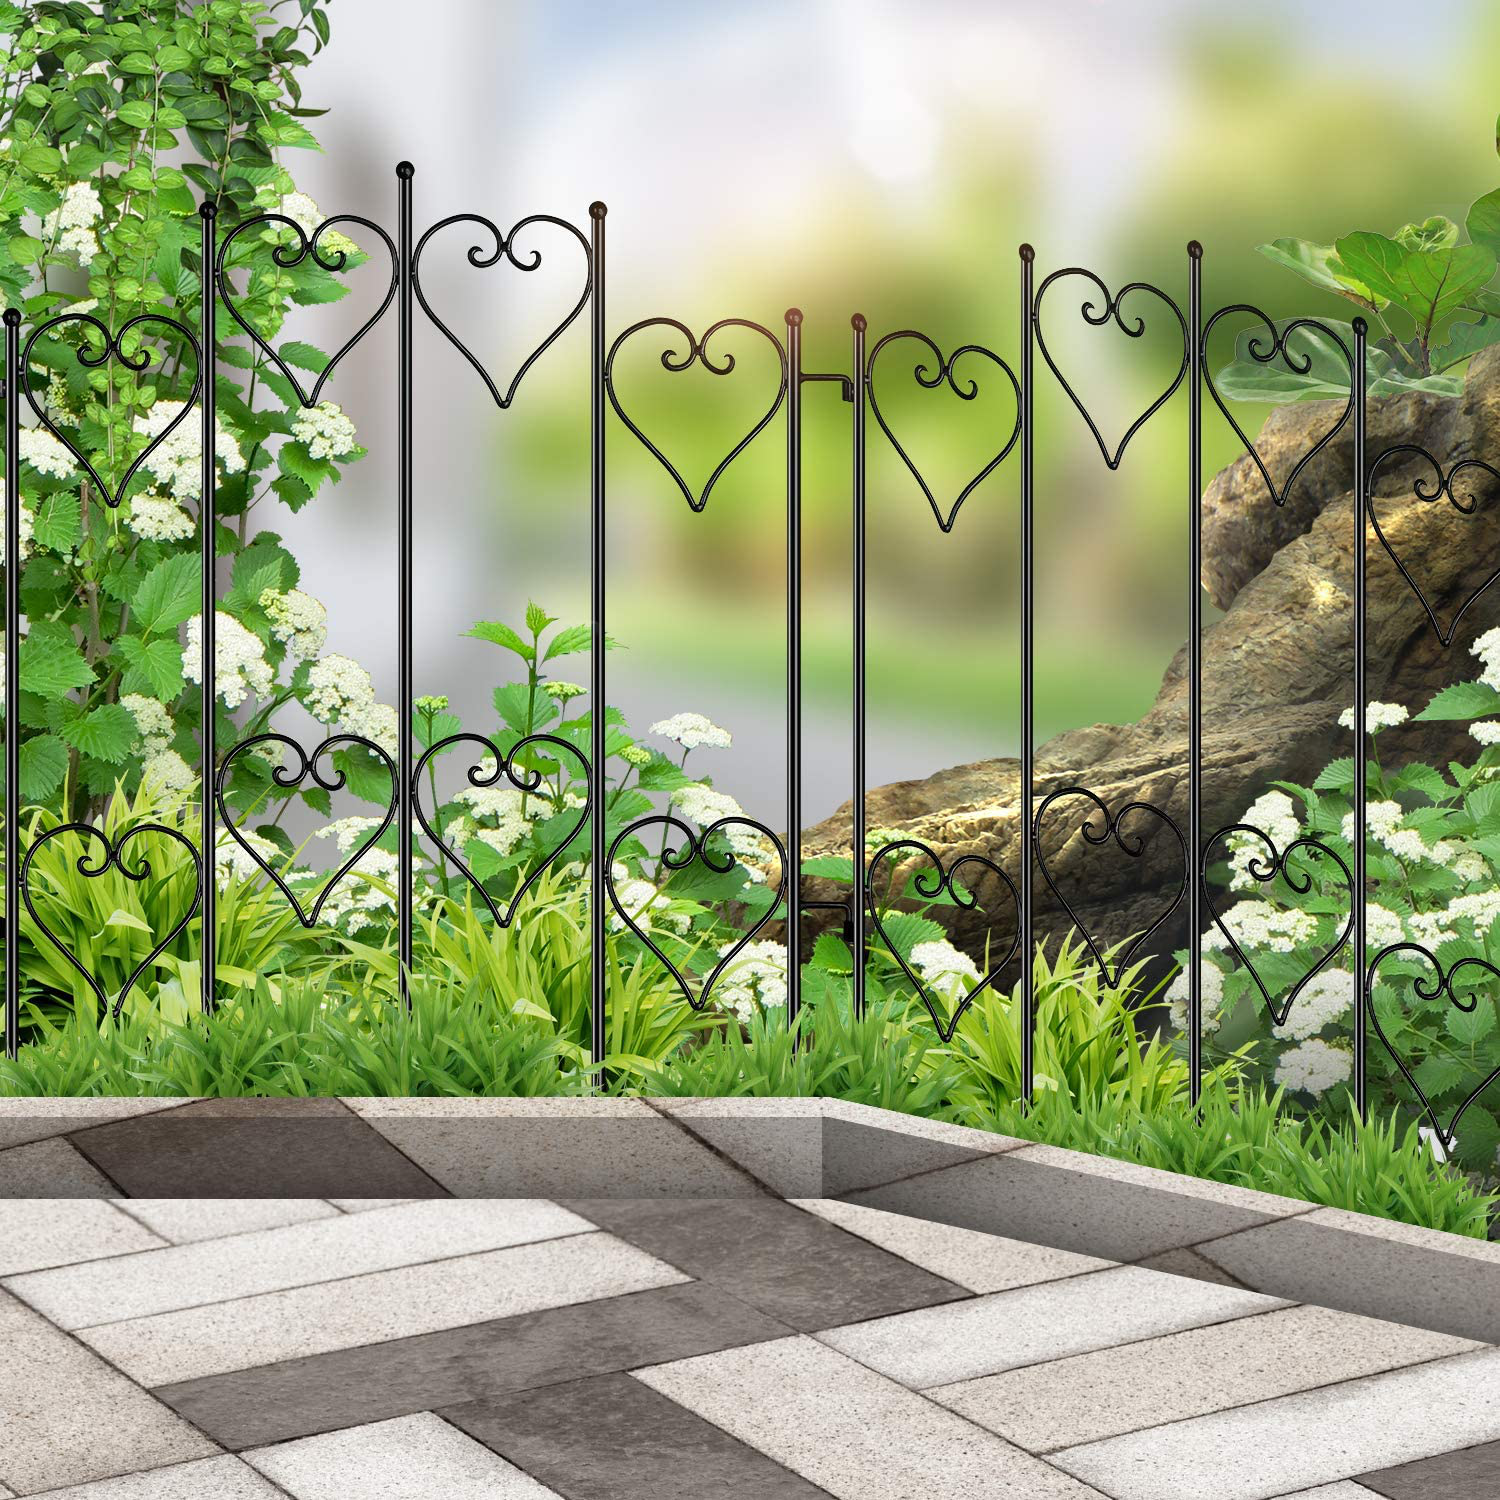 https://www.ekrhome.com/decorative-garden-fence-27inx9ft-outdoor-coated-rustproof-metal-garden-fencing-panel-animal-barrier-iron-folding-edge-wire-border-fence-ornamental-for-patio-landscape-flower-bed-fc05-product/